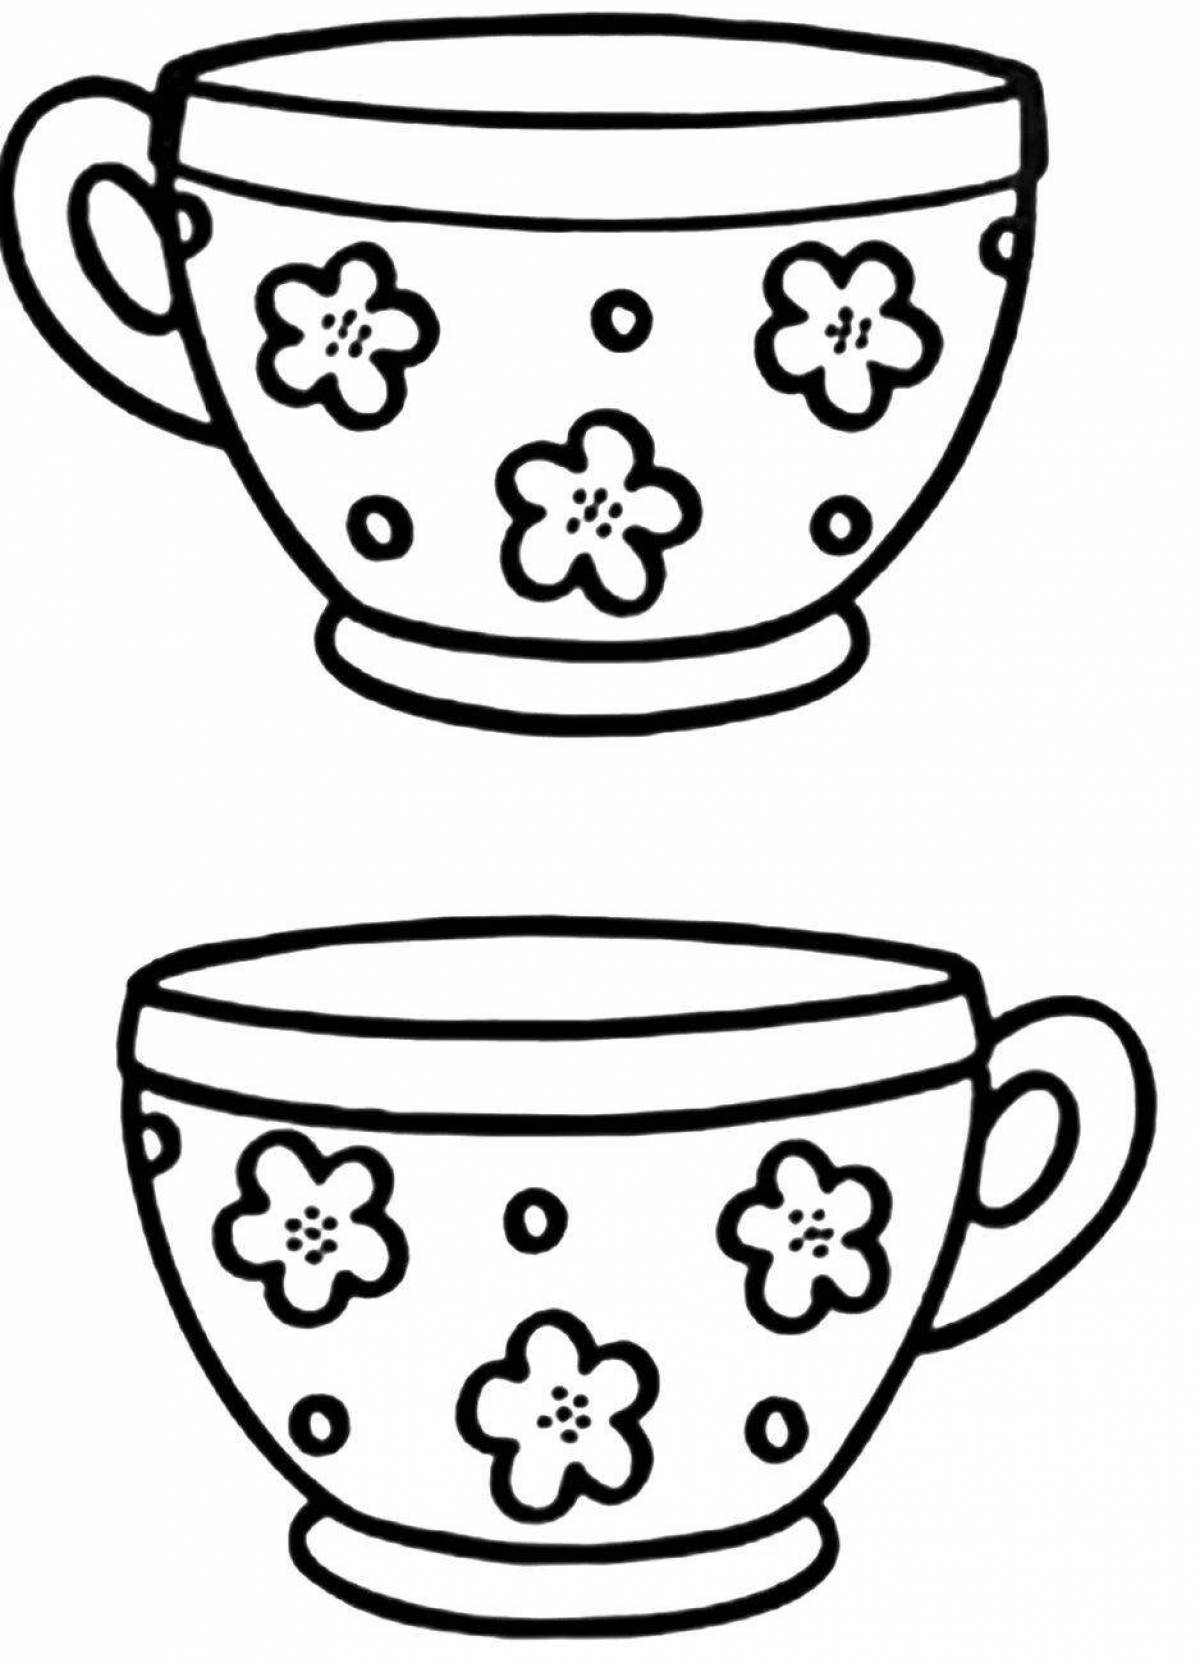 Bright cup and saucer appliqué template